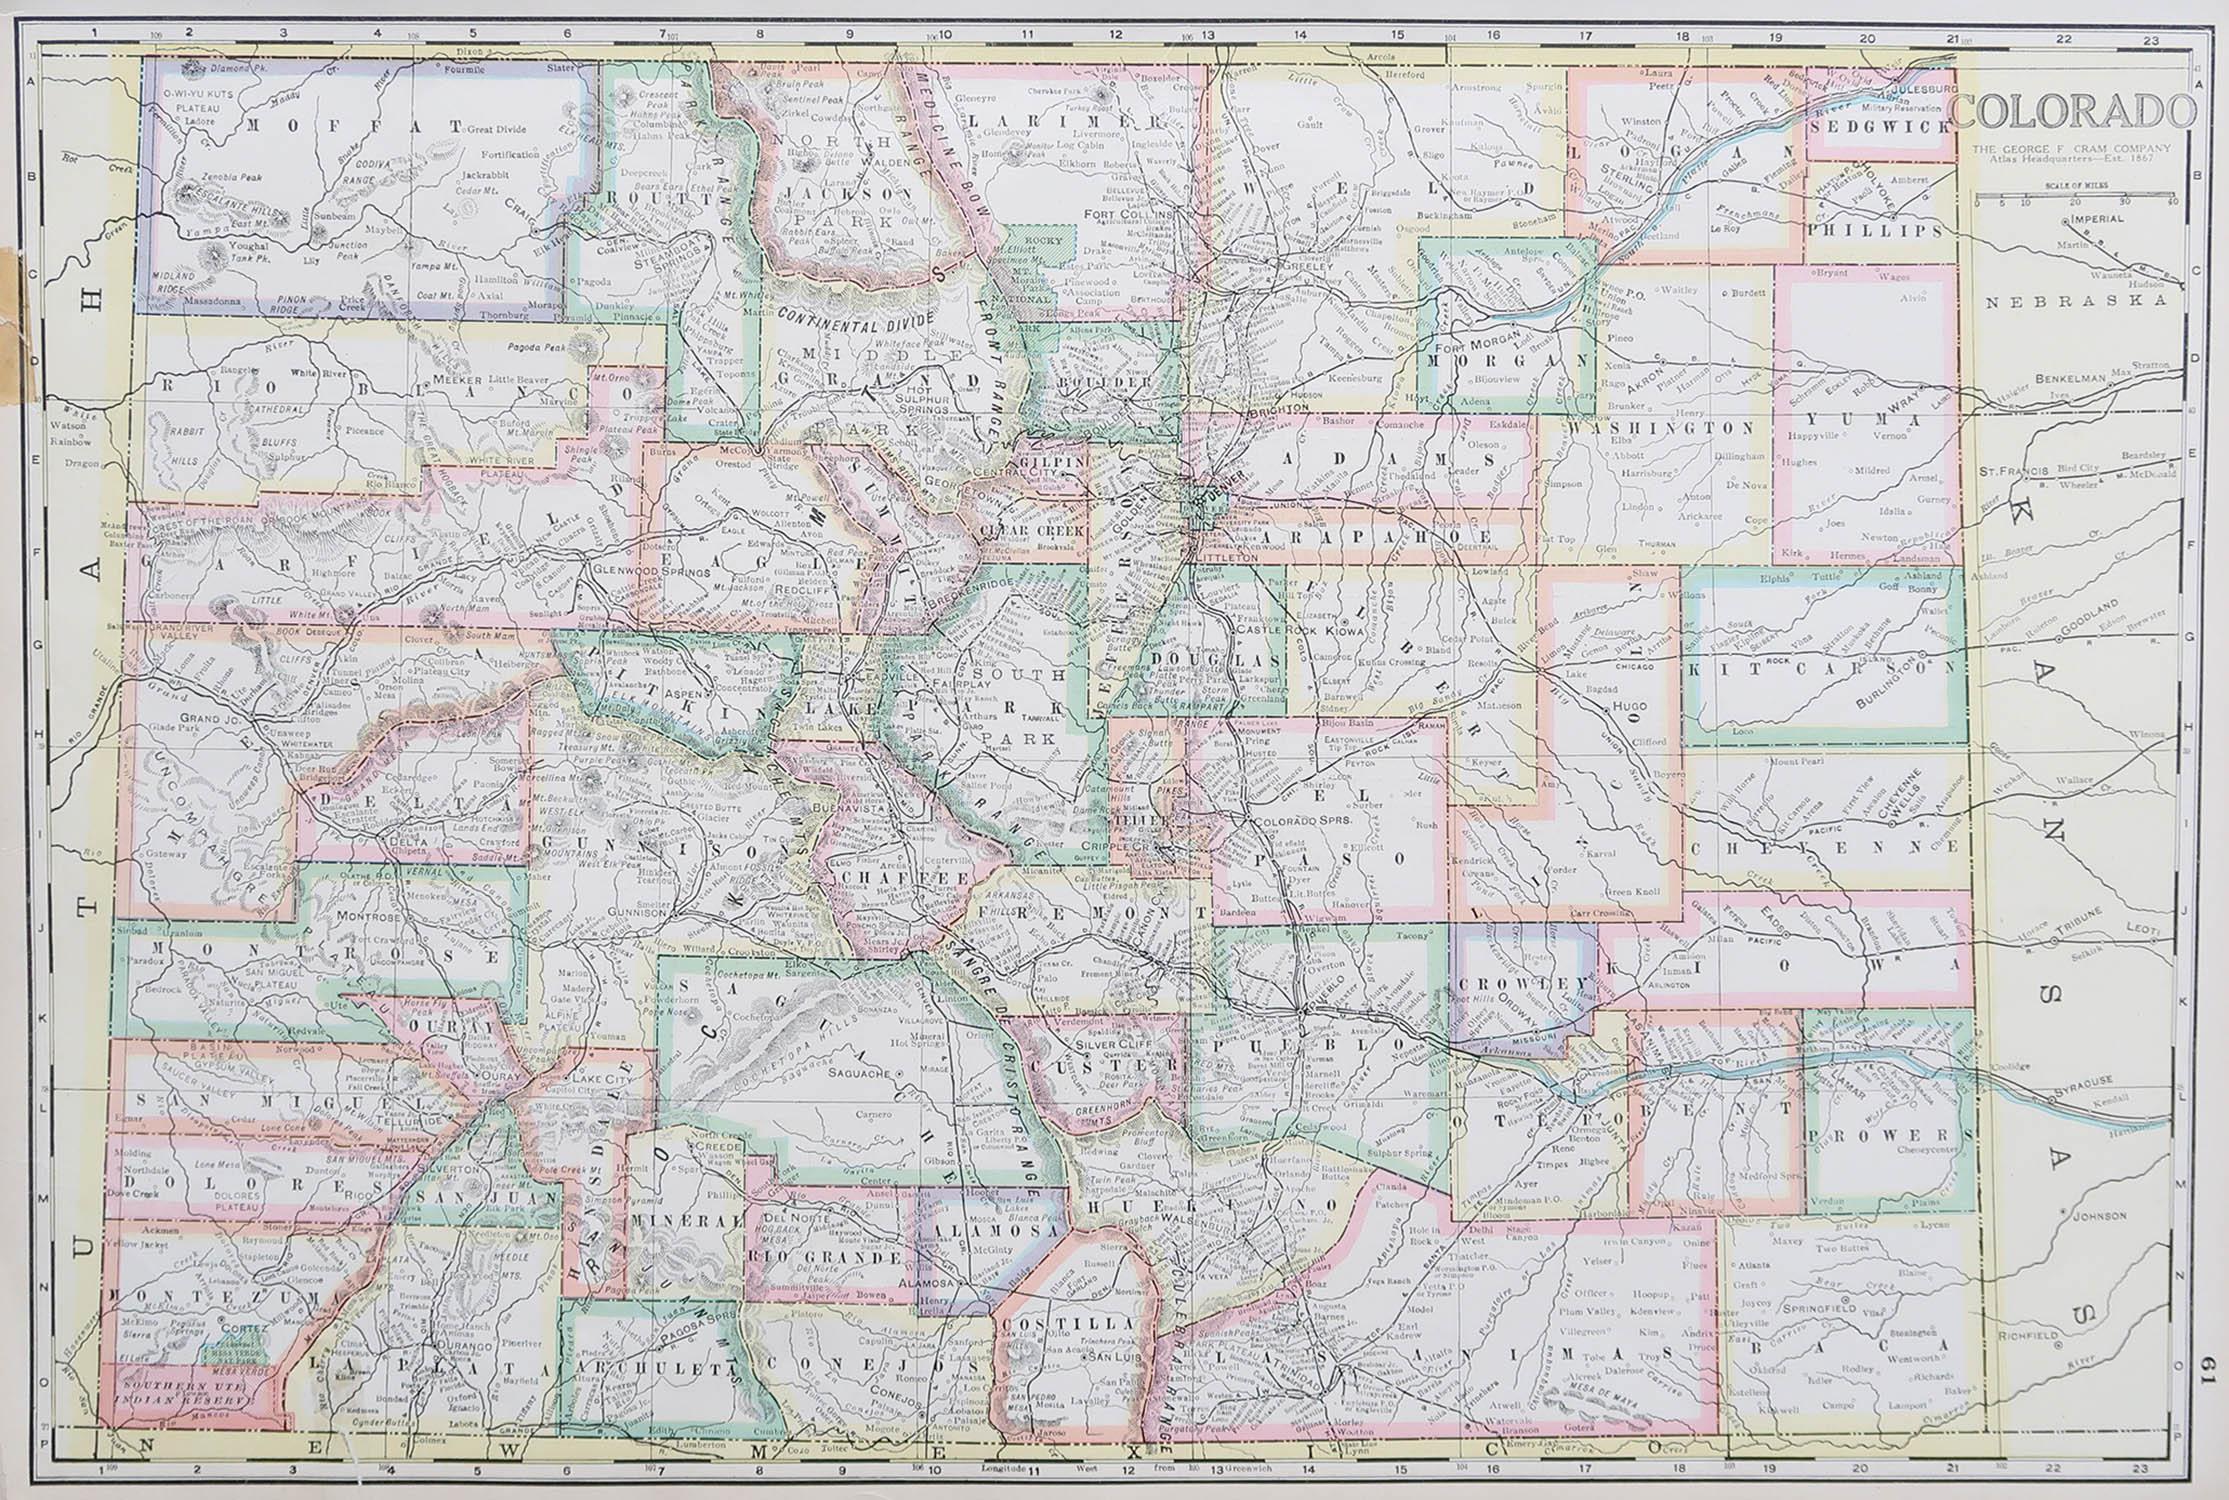 Fabulous map of Colorado

Original color

Engraved and printed by the George F. Cram Company, Indianapolis.

Published, circa 1900

Unframed

Old repairs to short trears on left and bottom edge

 